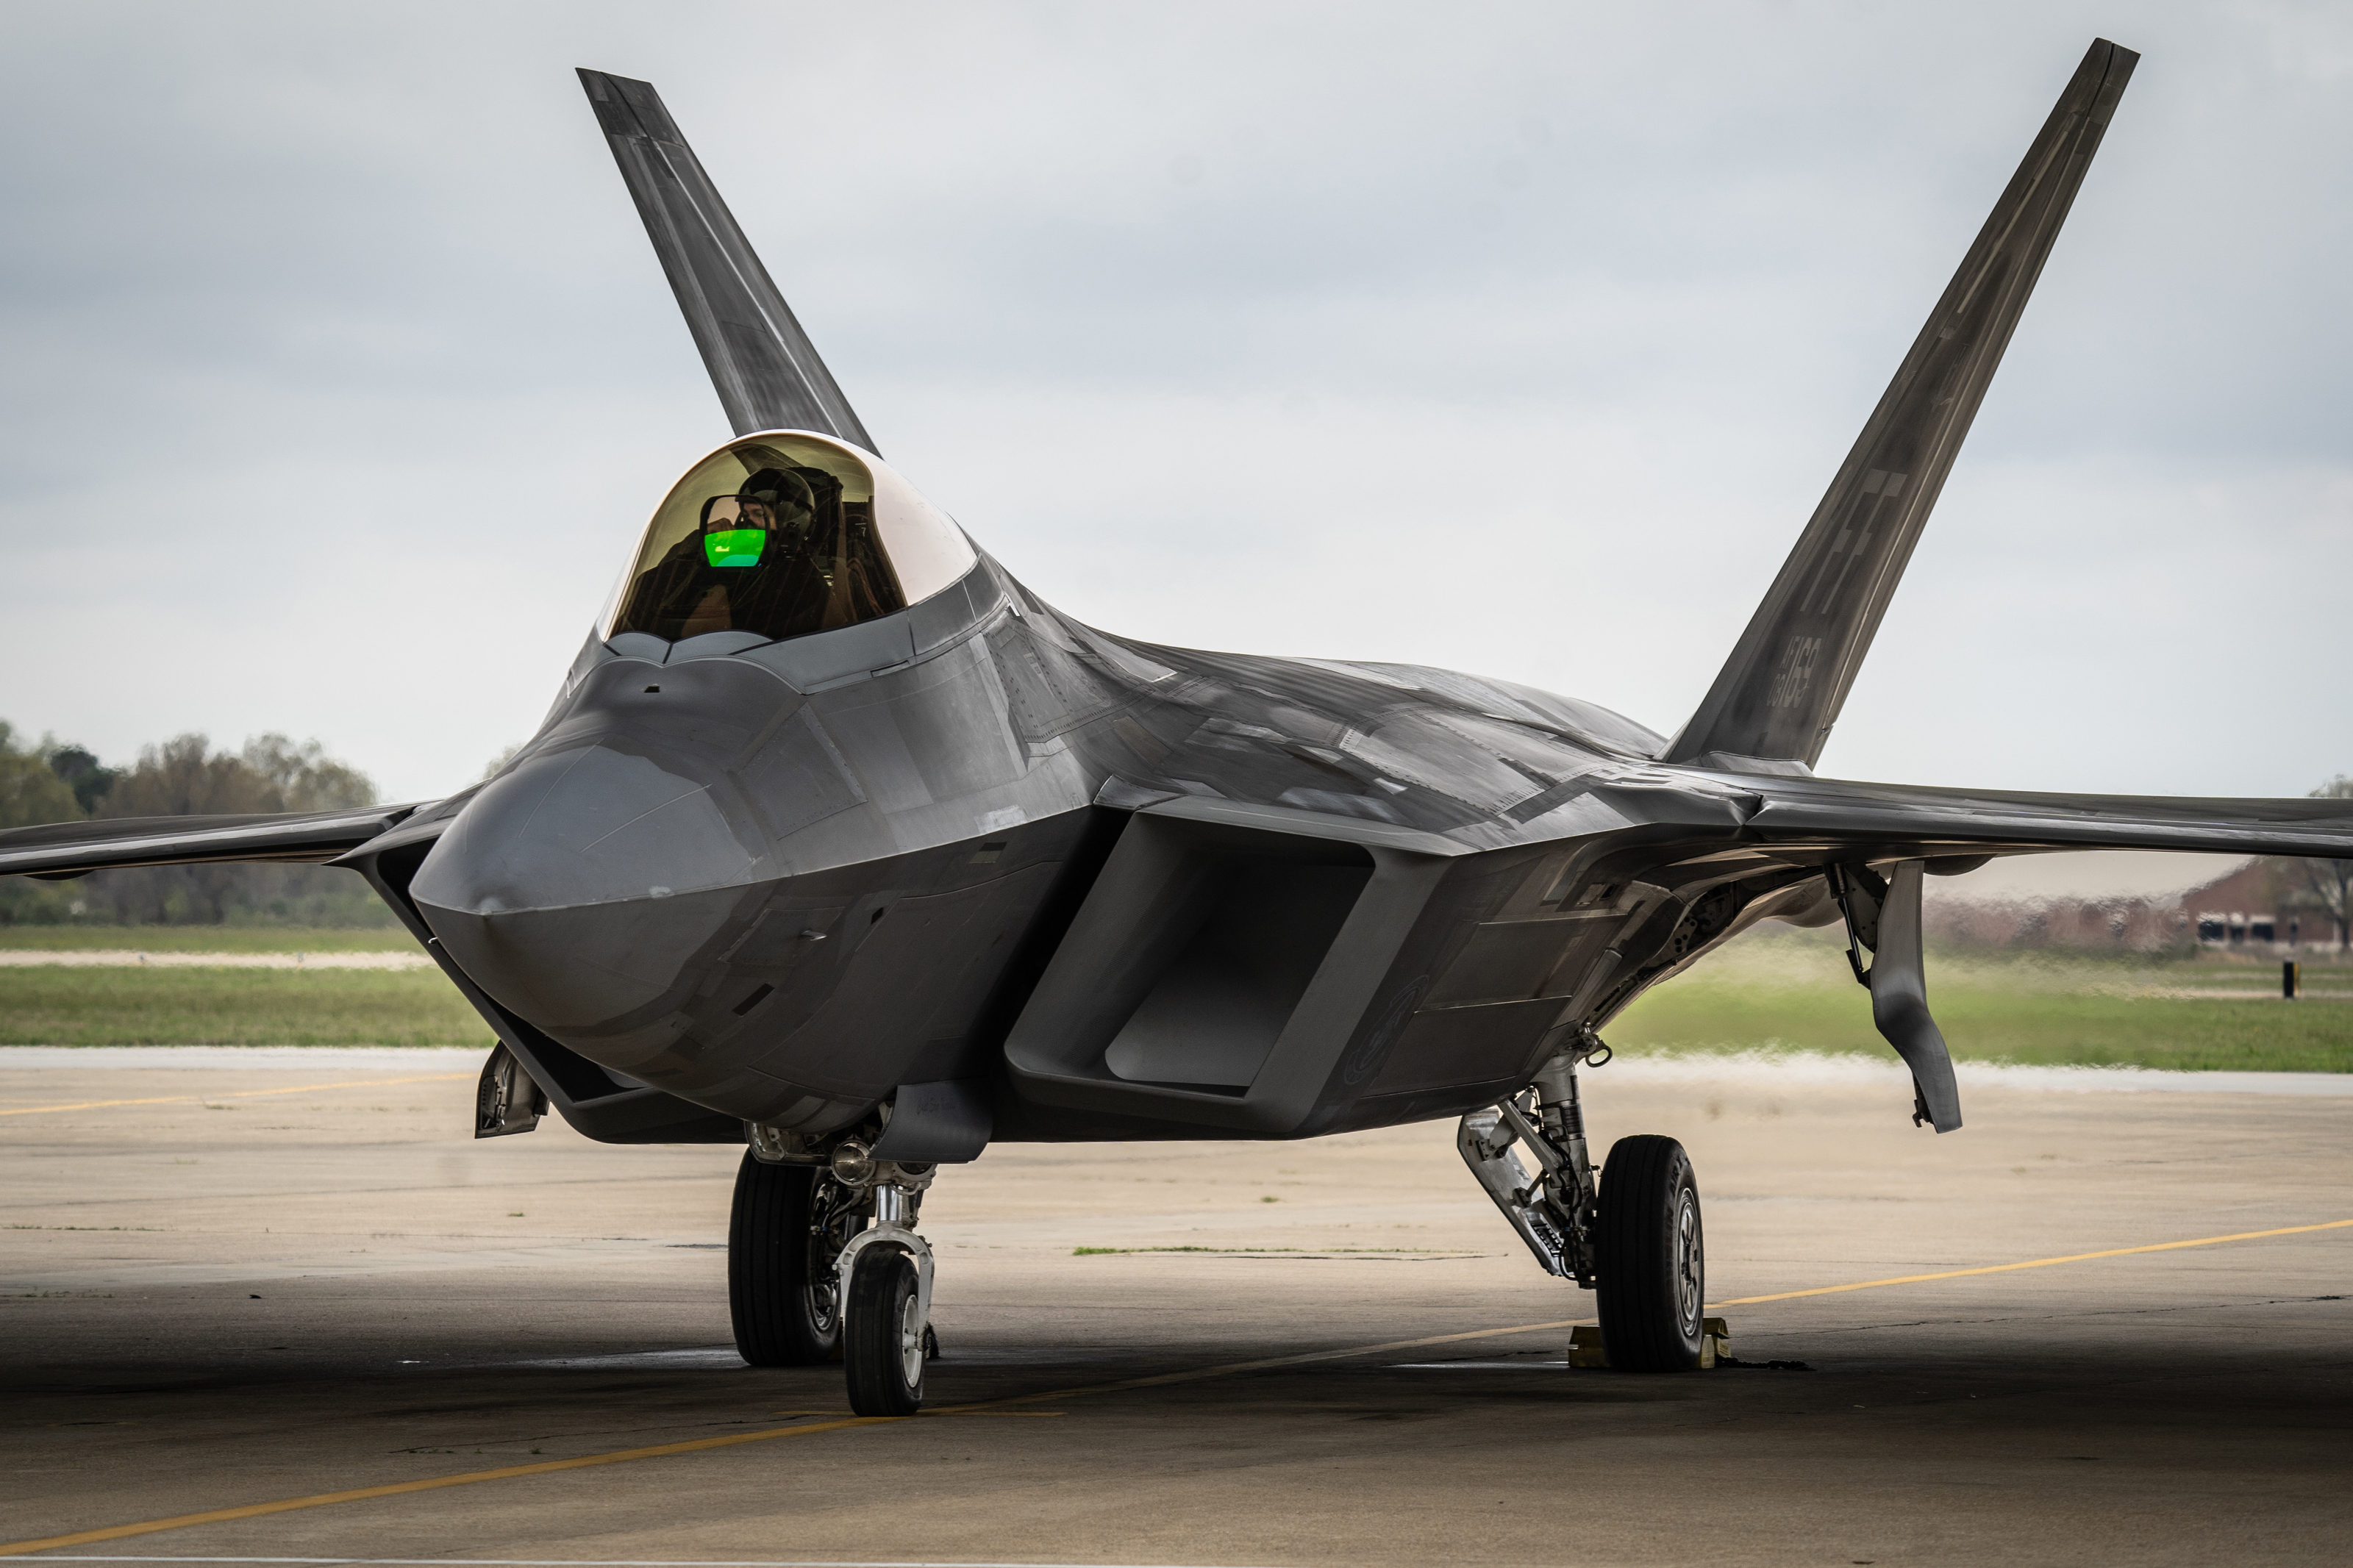 Air Force S Reforge Plan Could Put Some Older F 22s In Red Air Role Military Com